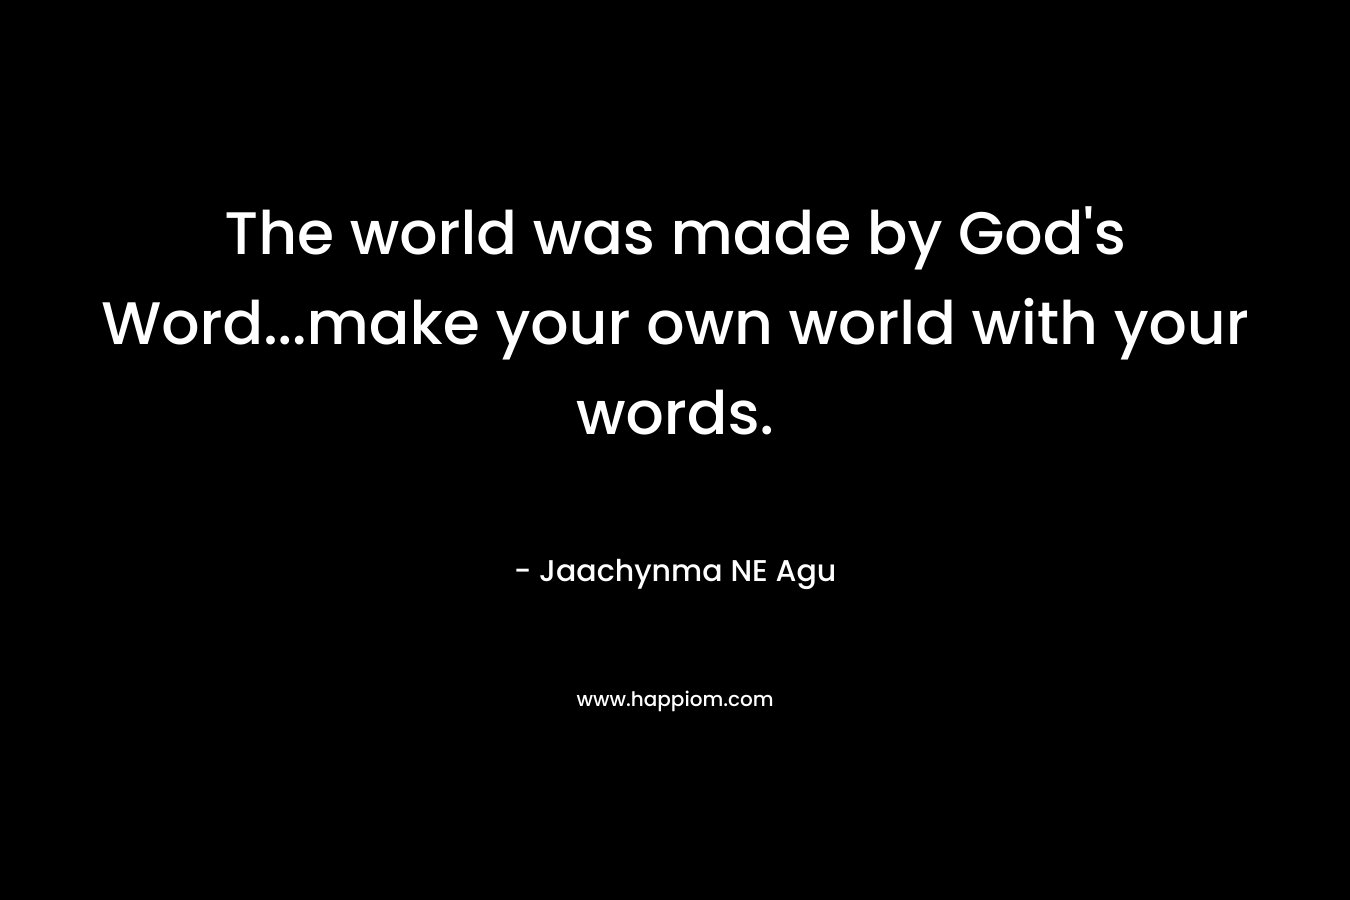 The world was made by God's Word...make your own world with your words.